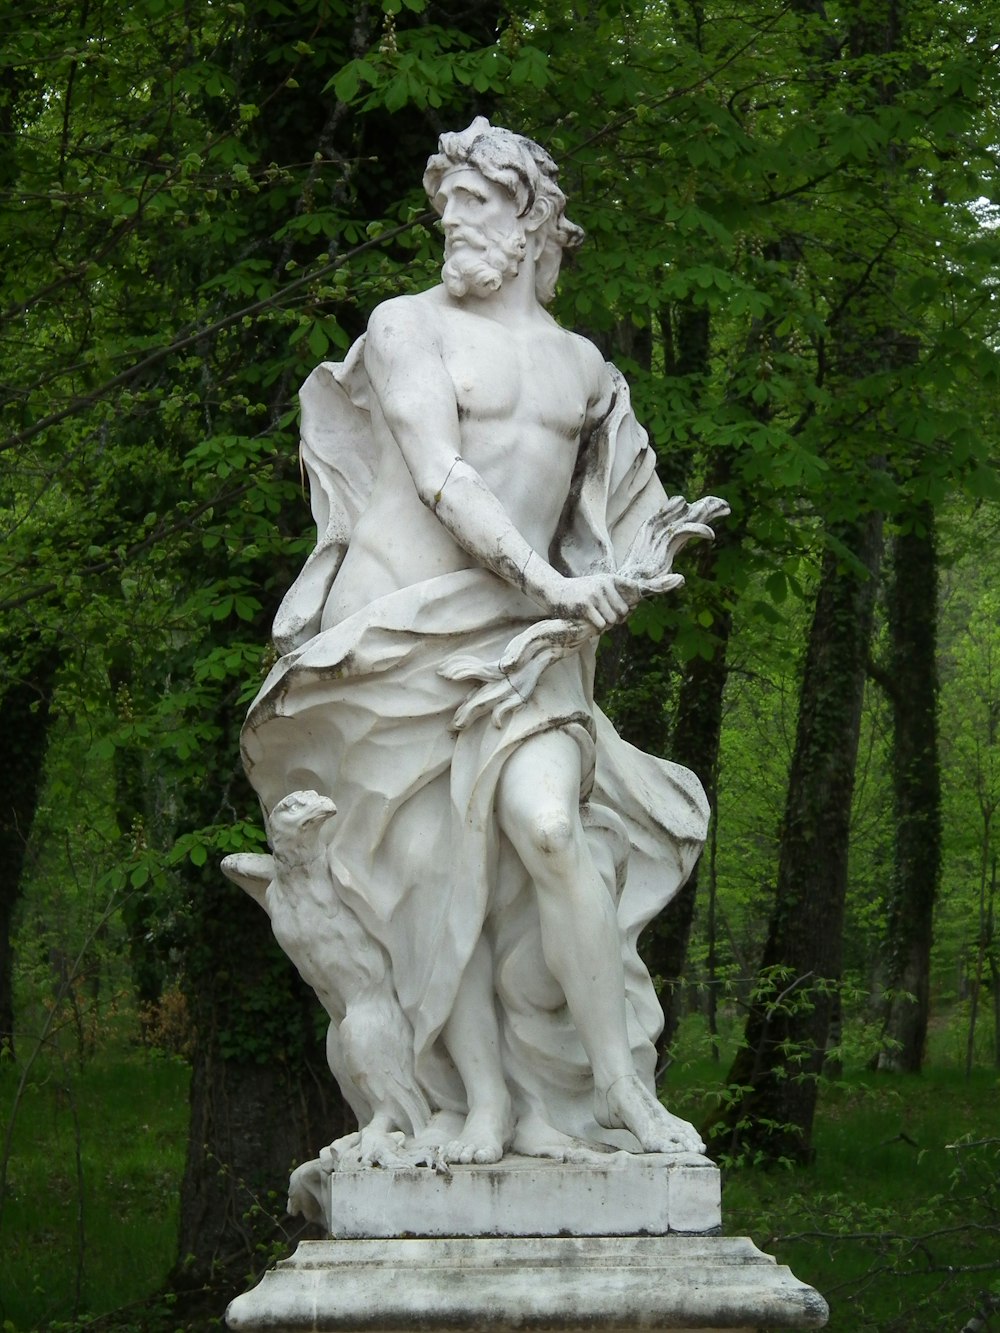 white angel statue near green trees during daytime